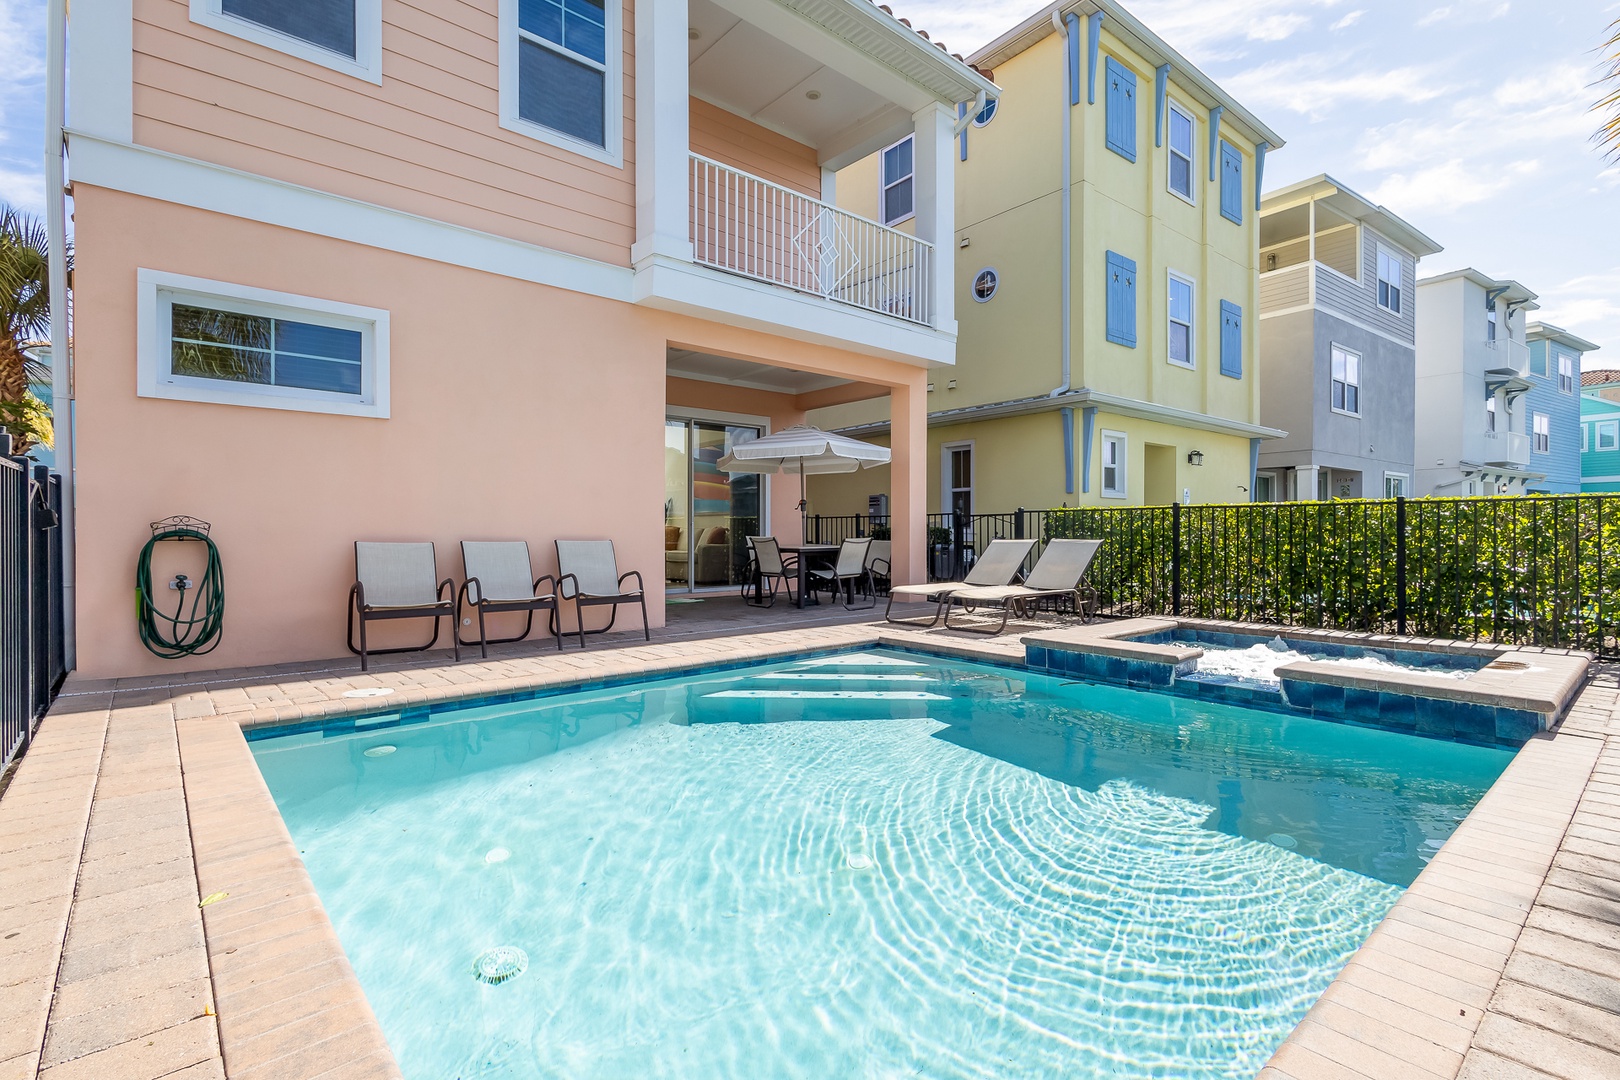 Make a splash in the private pool or soak your cares away in the bubbling hot tub!